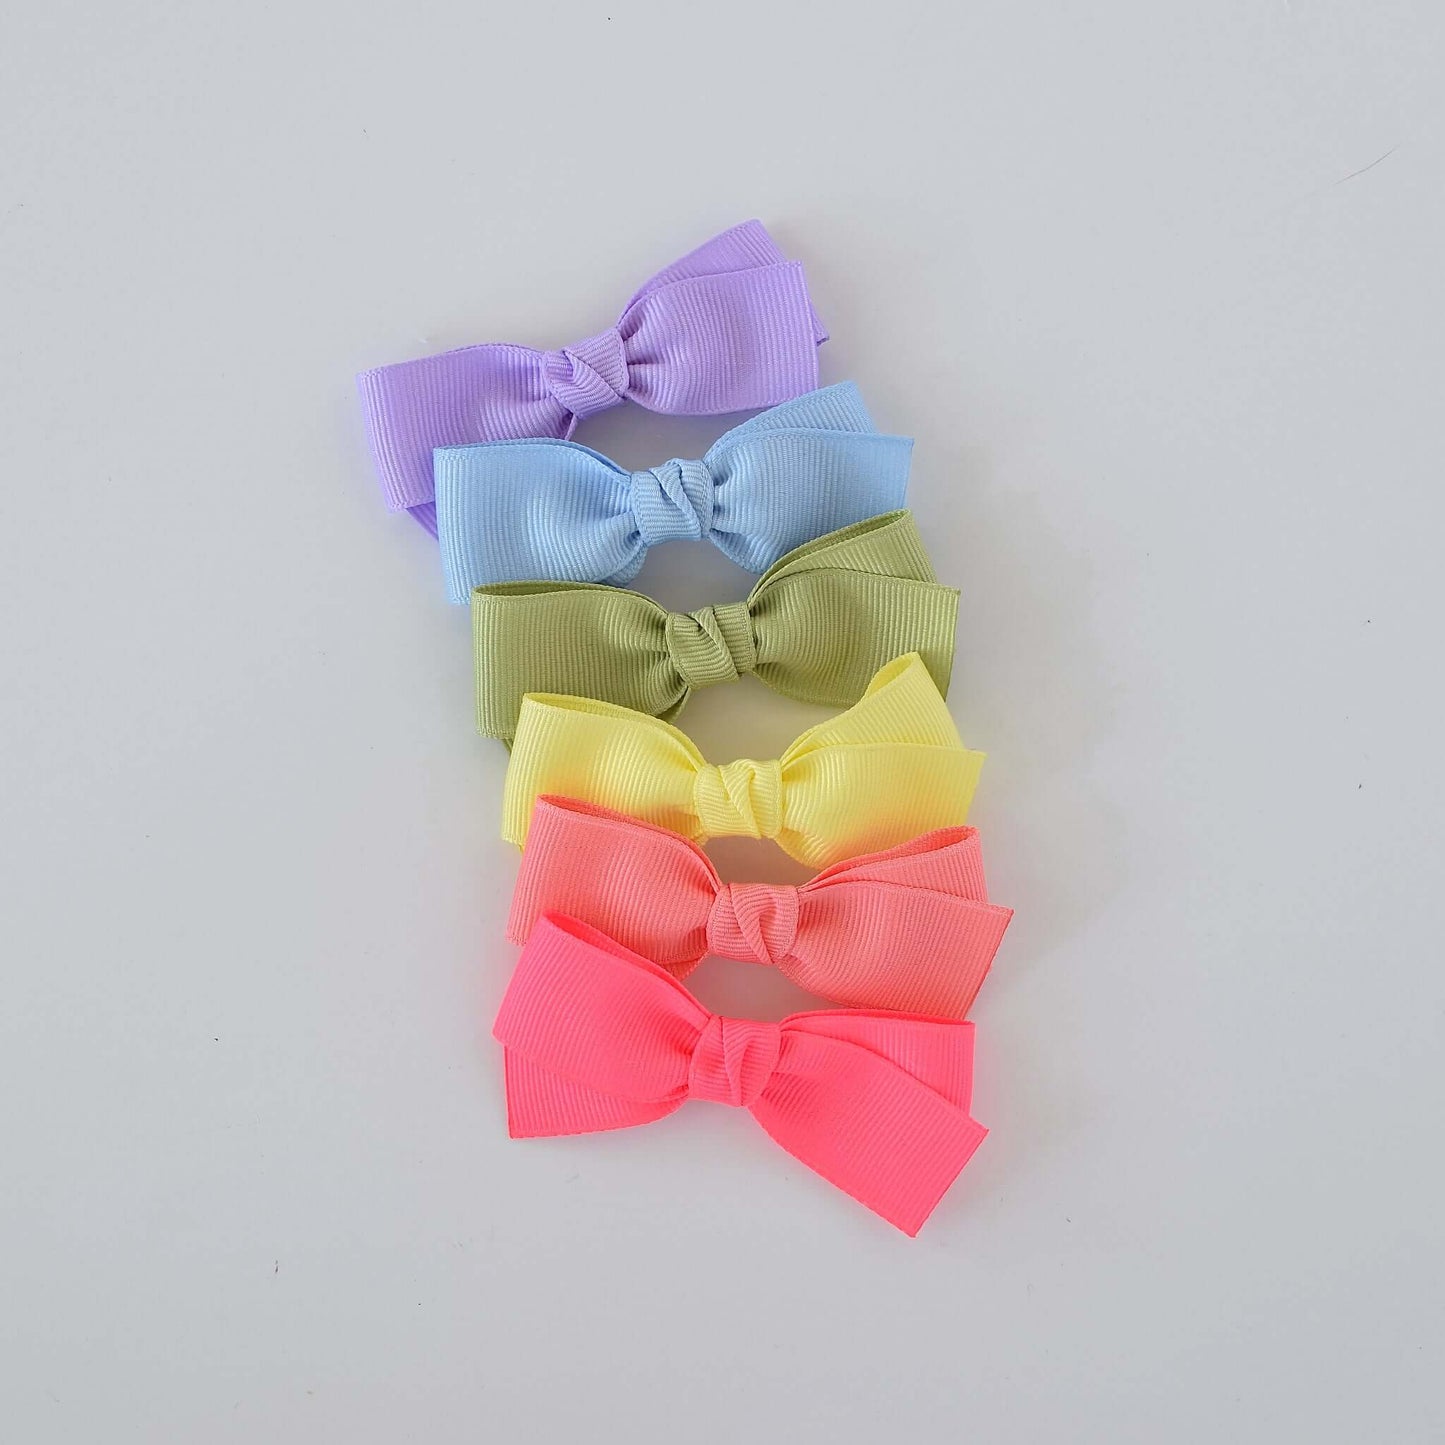 Assorted pastel Kayla bow clips in lavender, blue, green, yellow, and coral grosgrain ribbon.